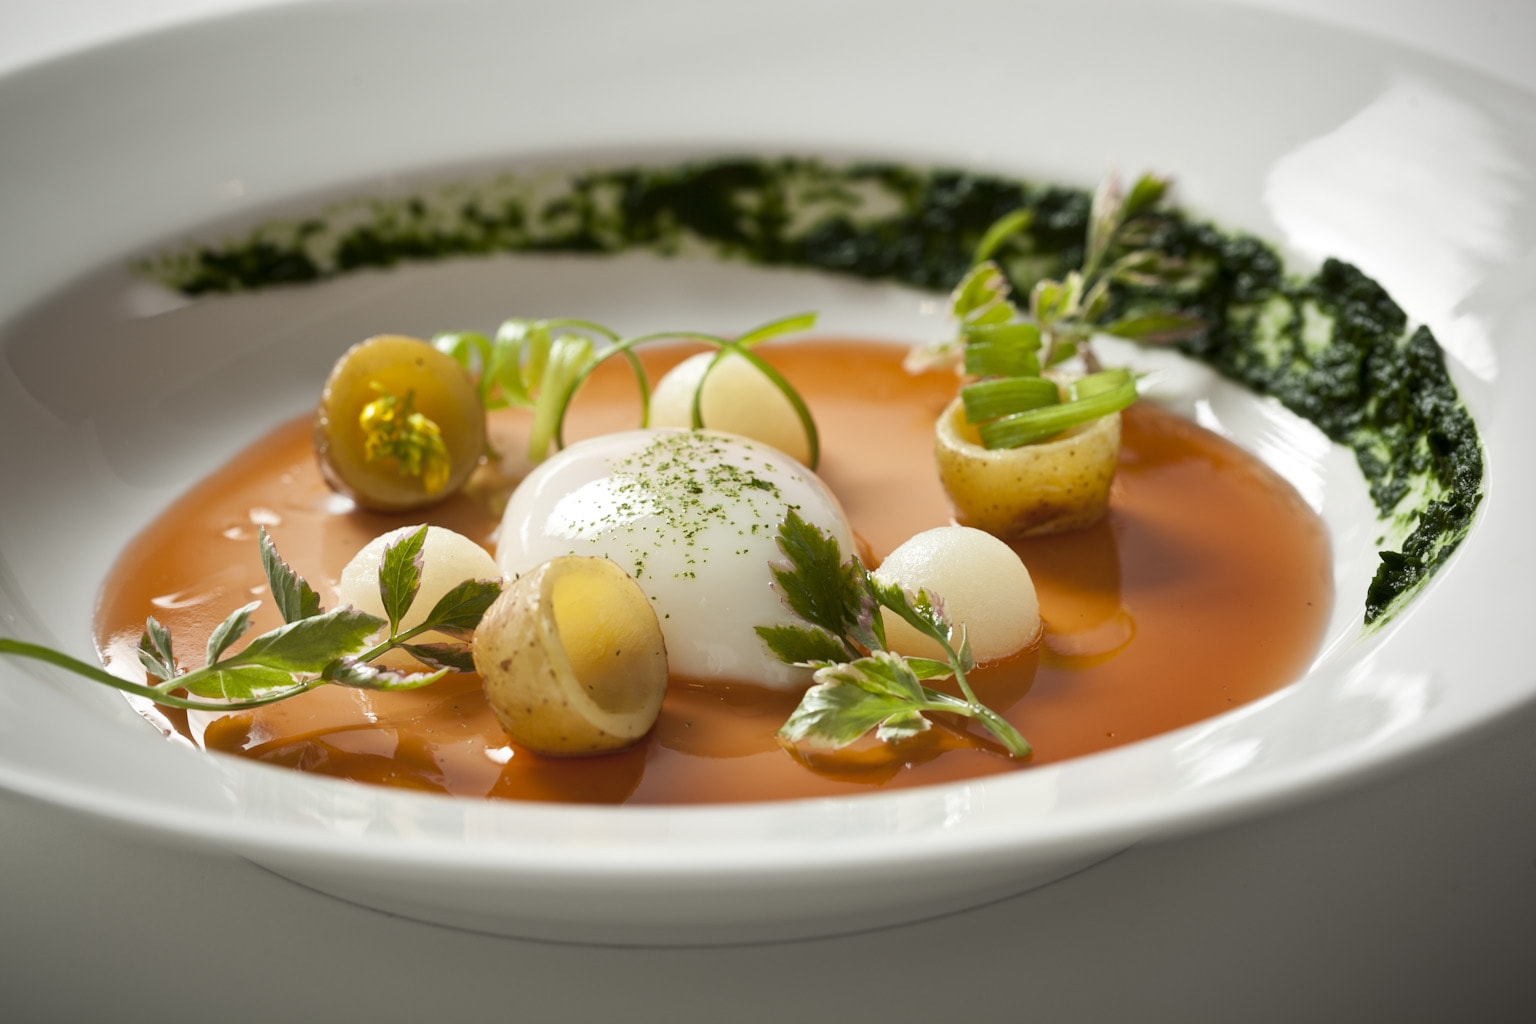 Sous Vide Poached Organic Duck Egg with Pee Wee Potato, Truffle Broth